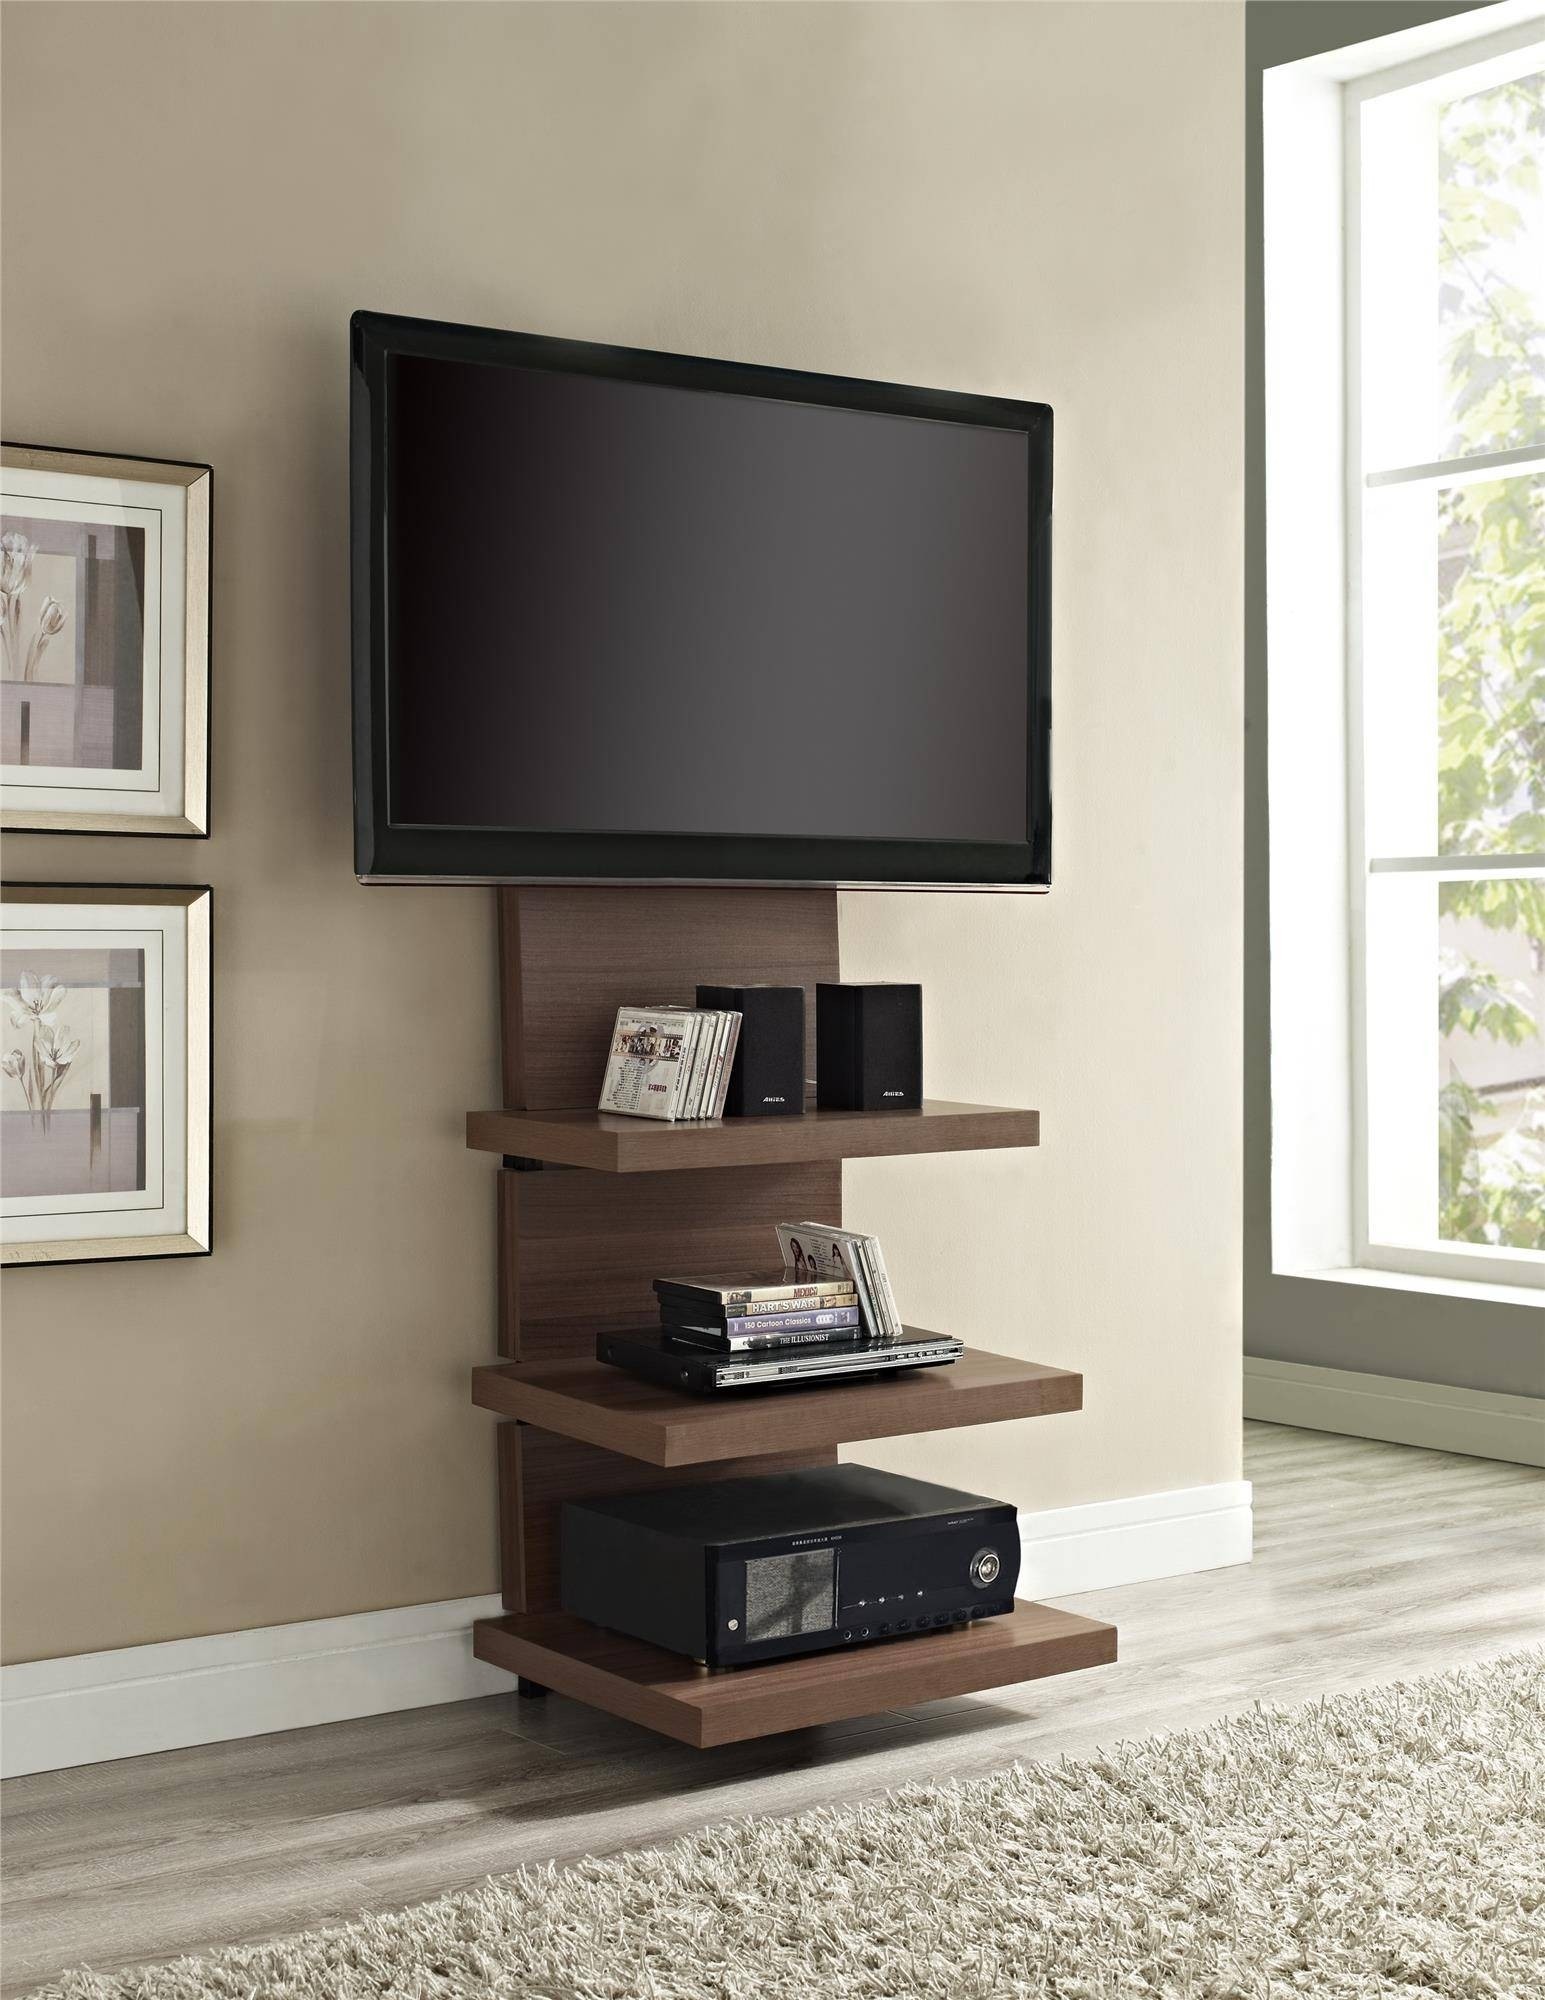 Best 15 of tall skinny tv stands